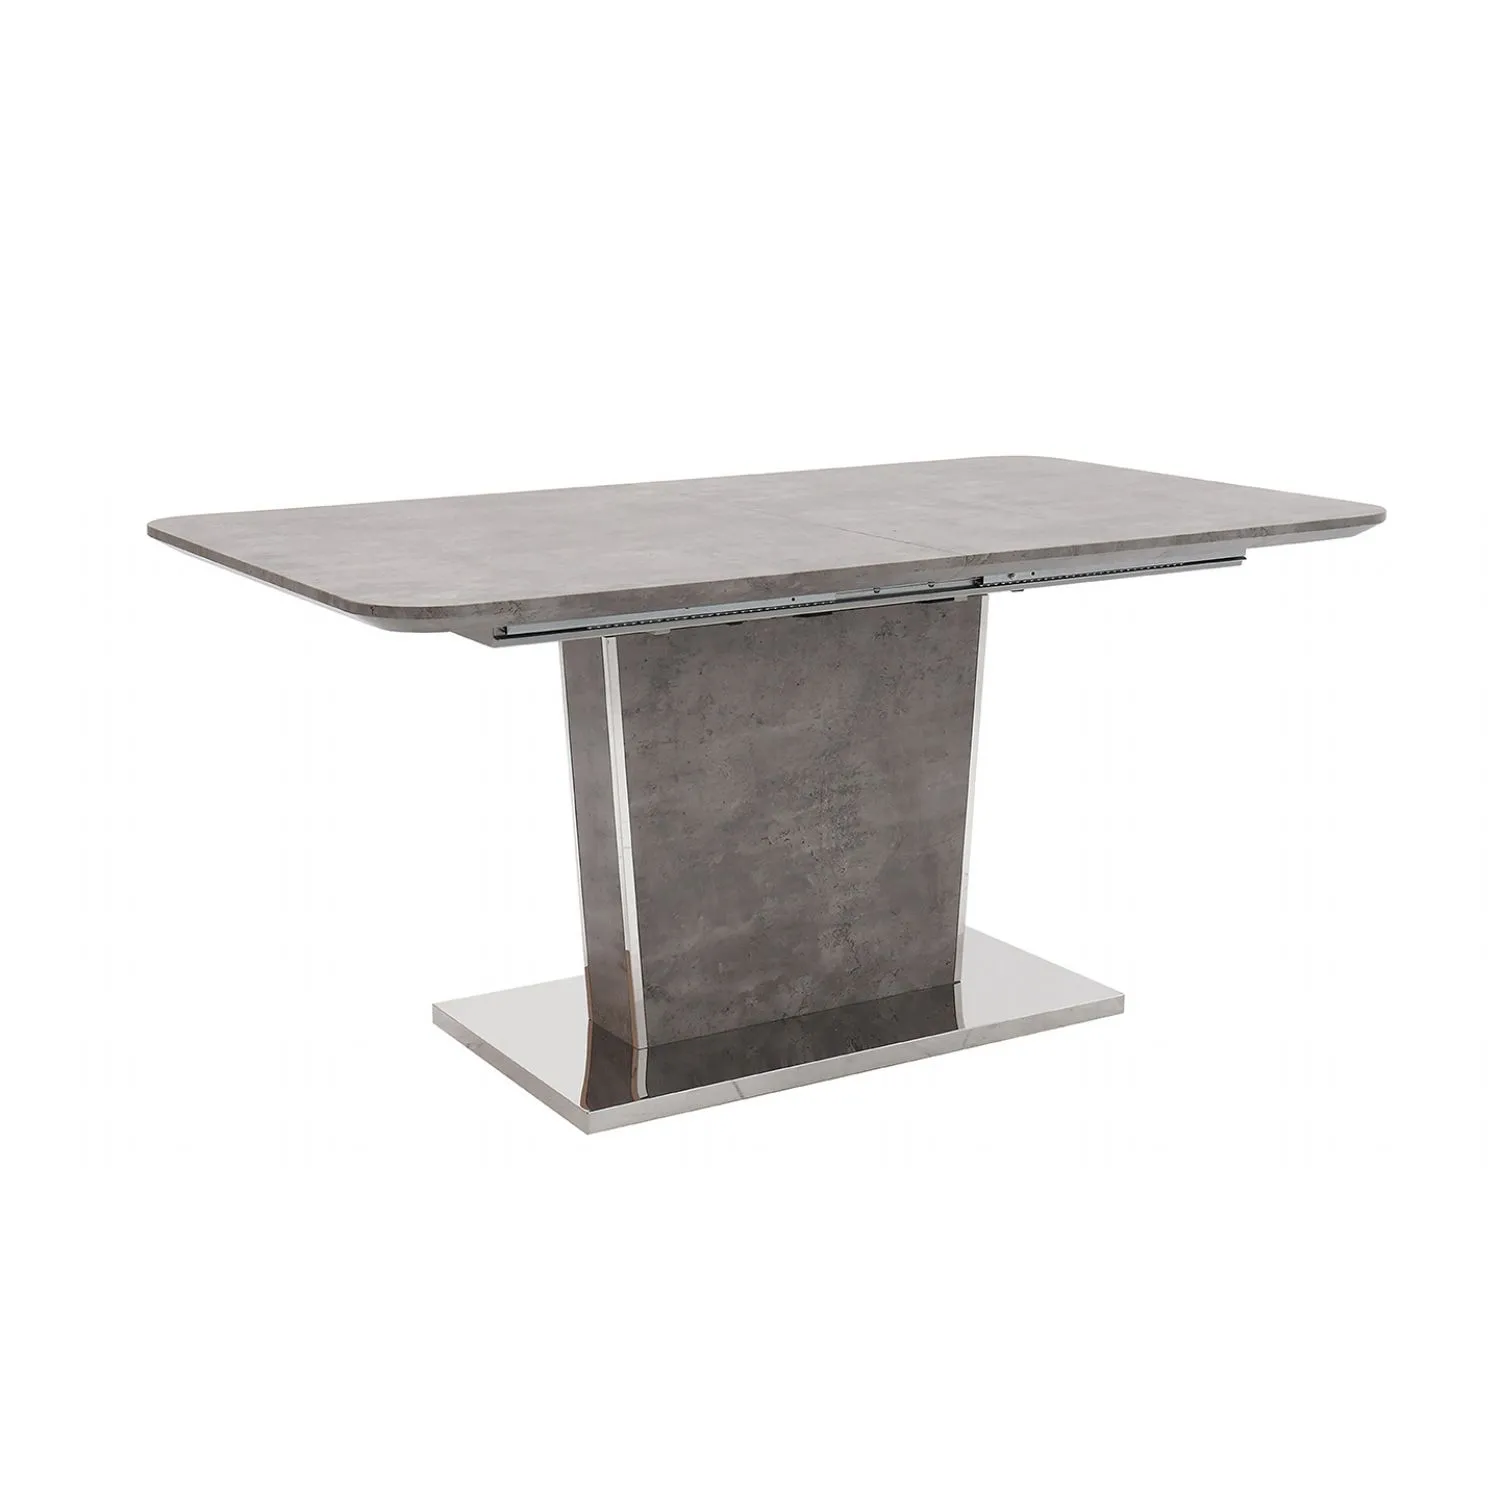 Modern Grey 160 to 200cm Extending Dining Table